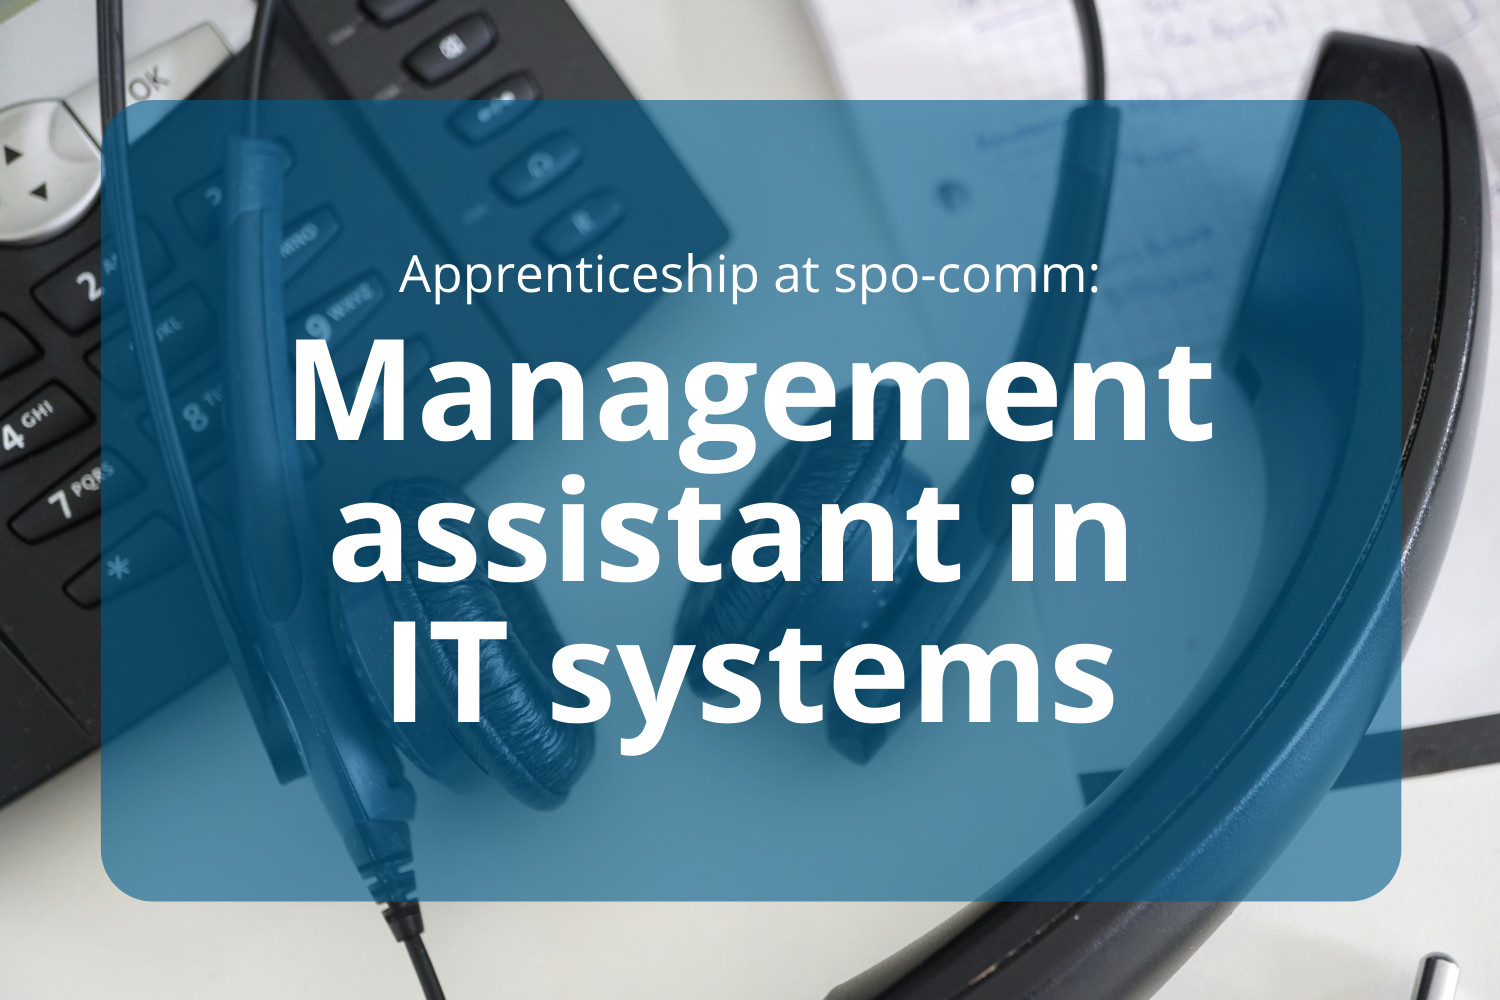 Apprenticeship as a management assistant in IT-systems at spo-comm